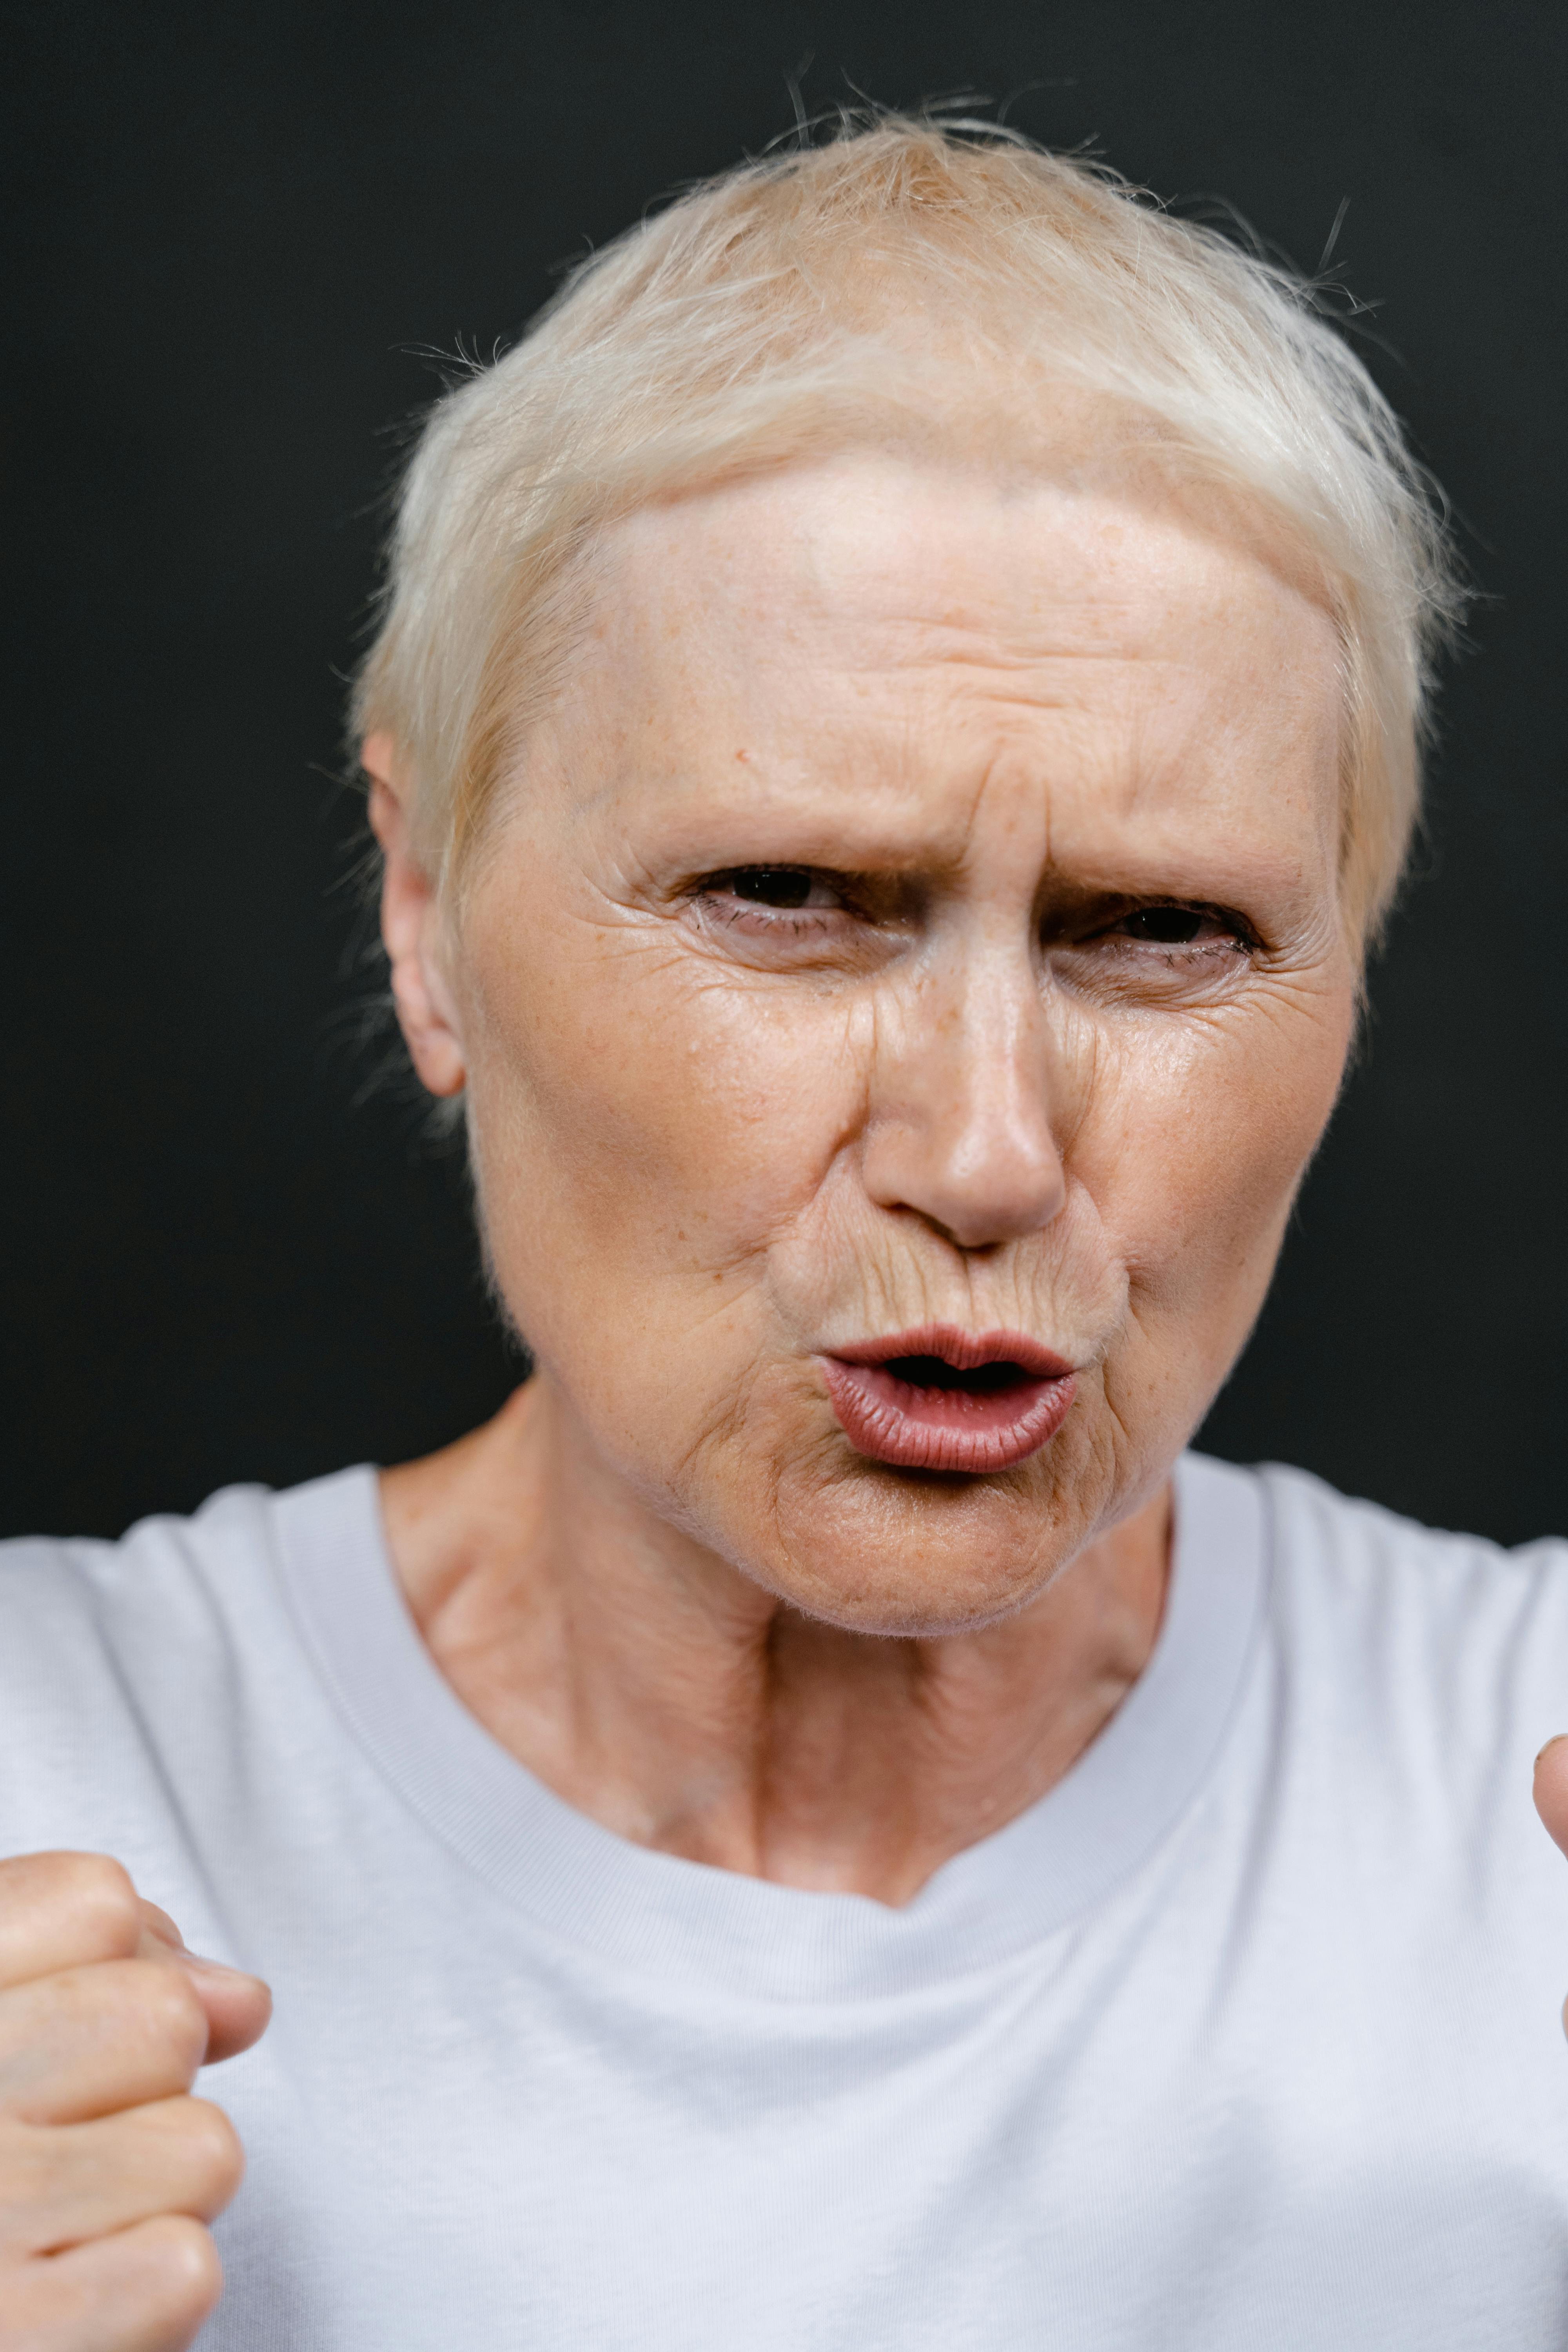 An angry older woman with her fists up | Source: Pexels